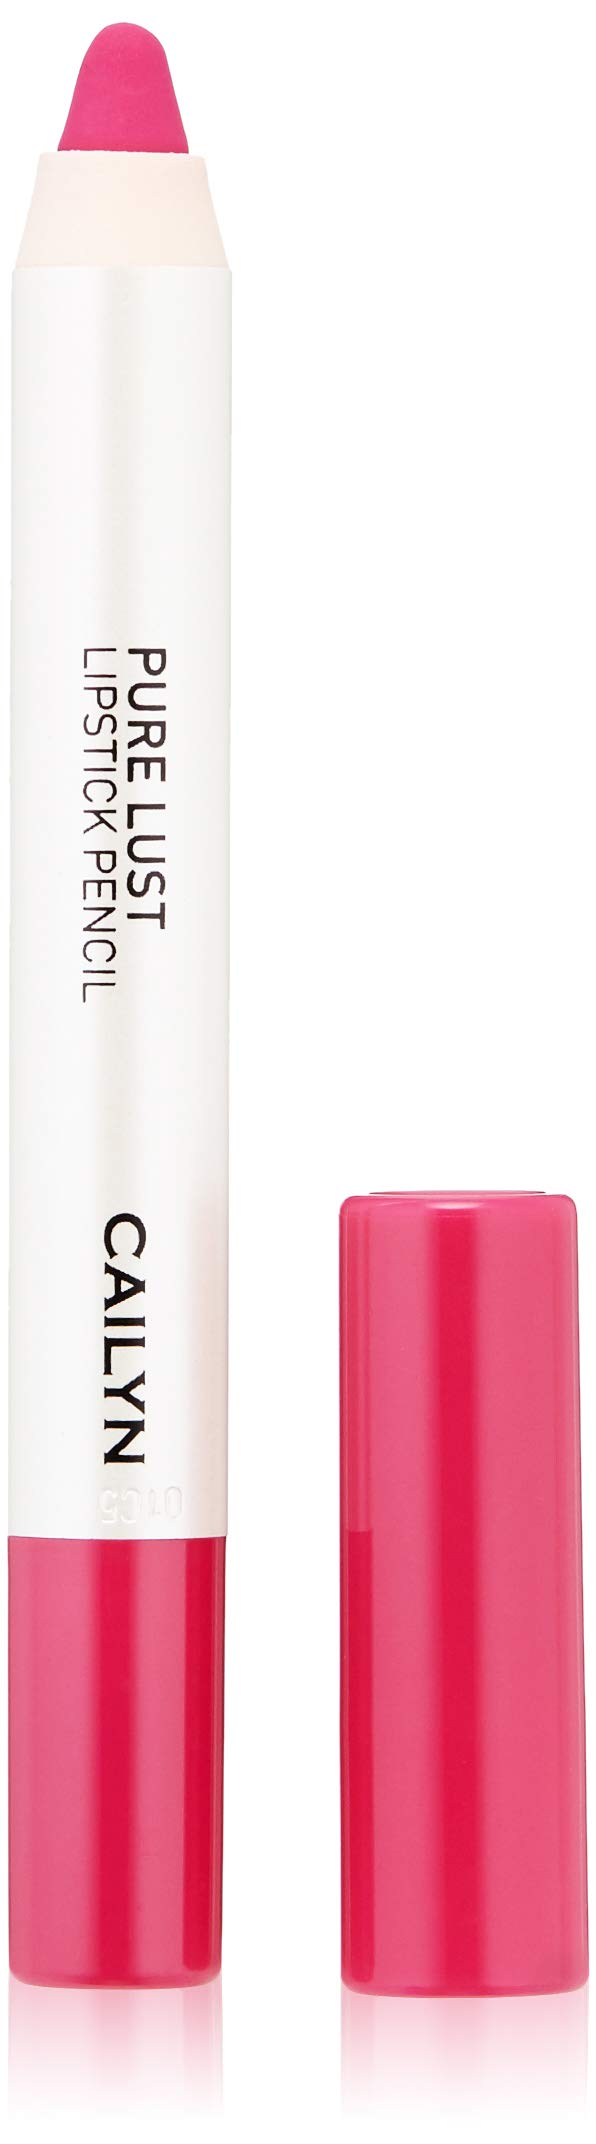 CAILYN Pure Lust Lipstick Pencil, Plum